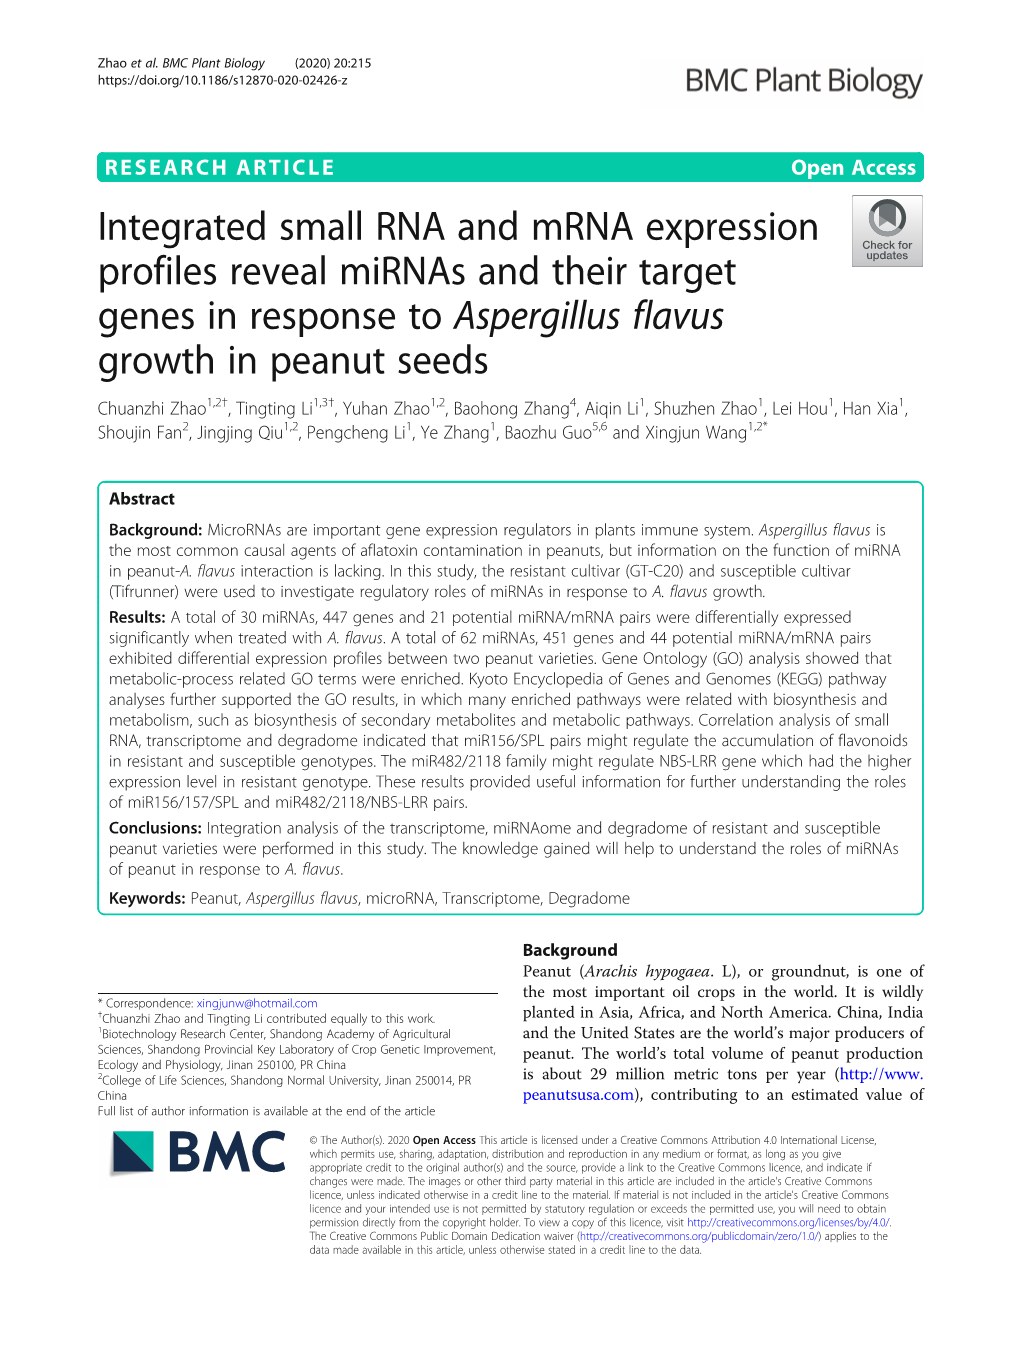 Integrated Small RNA and Mrna Expression Profiles Reveal Mirnas